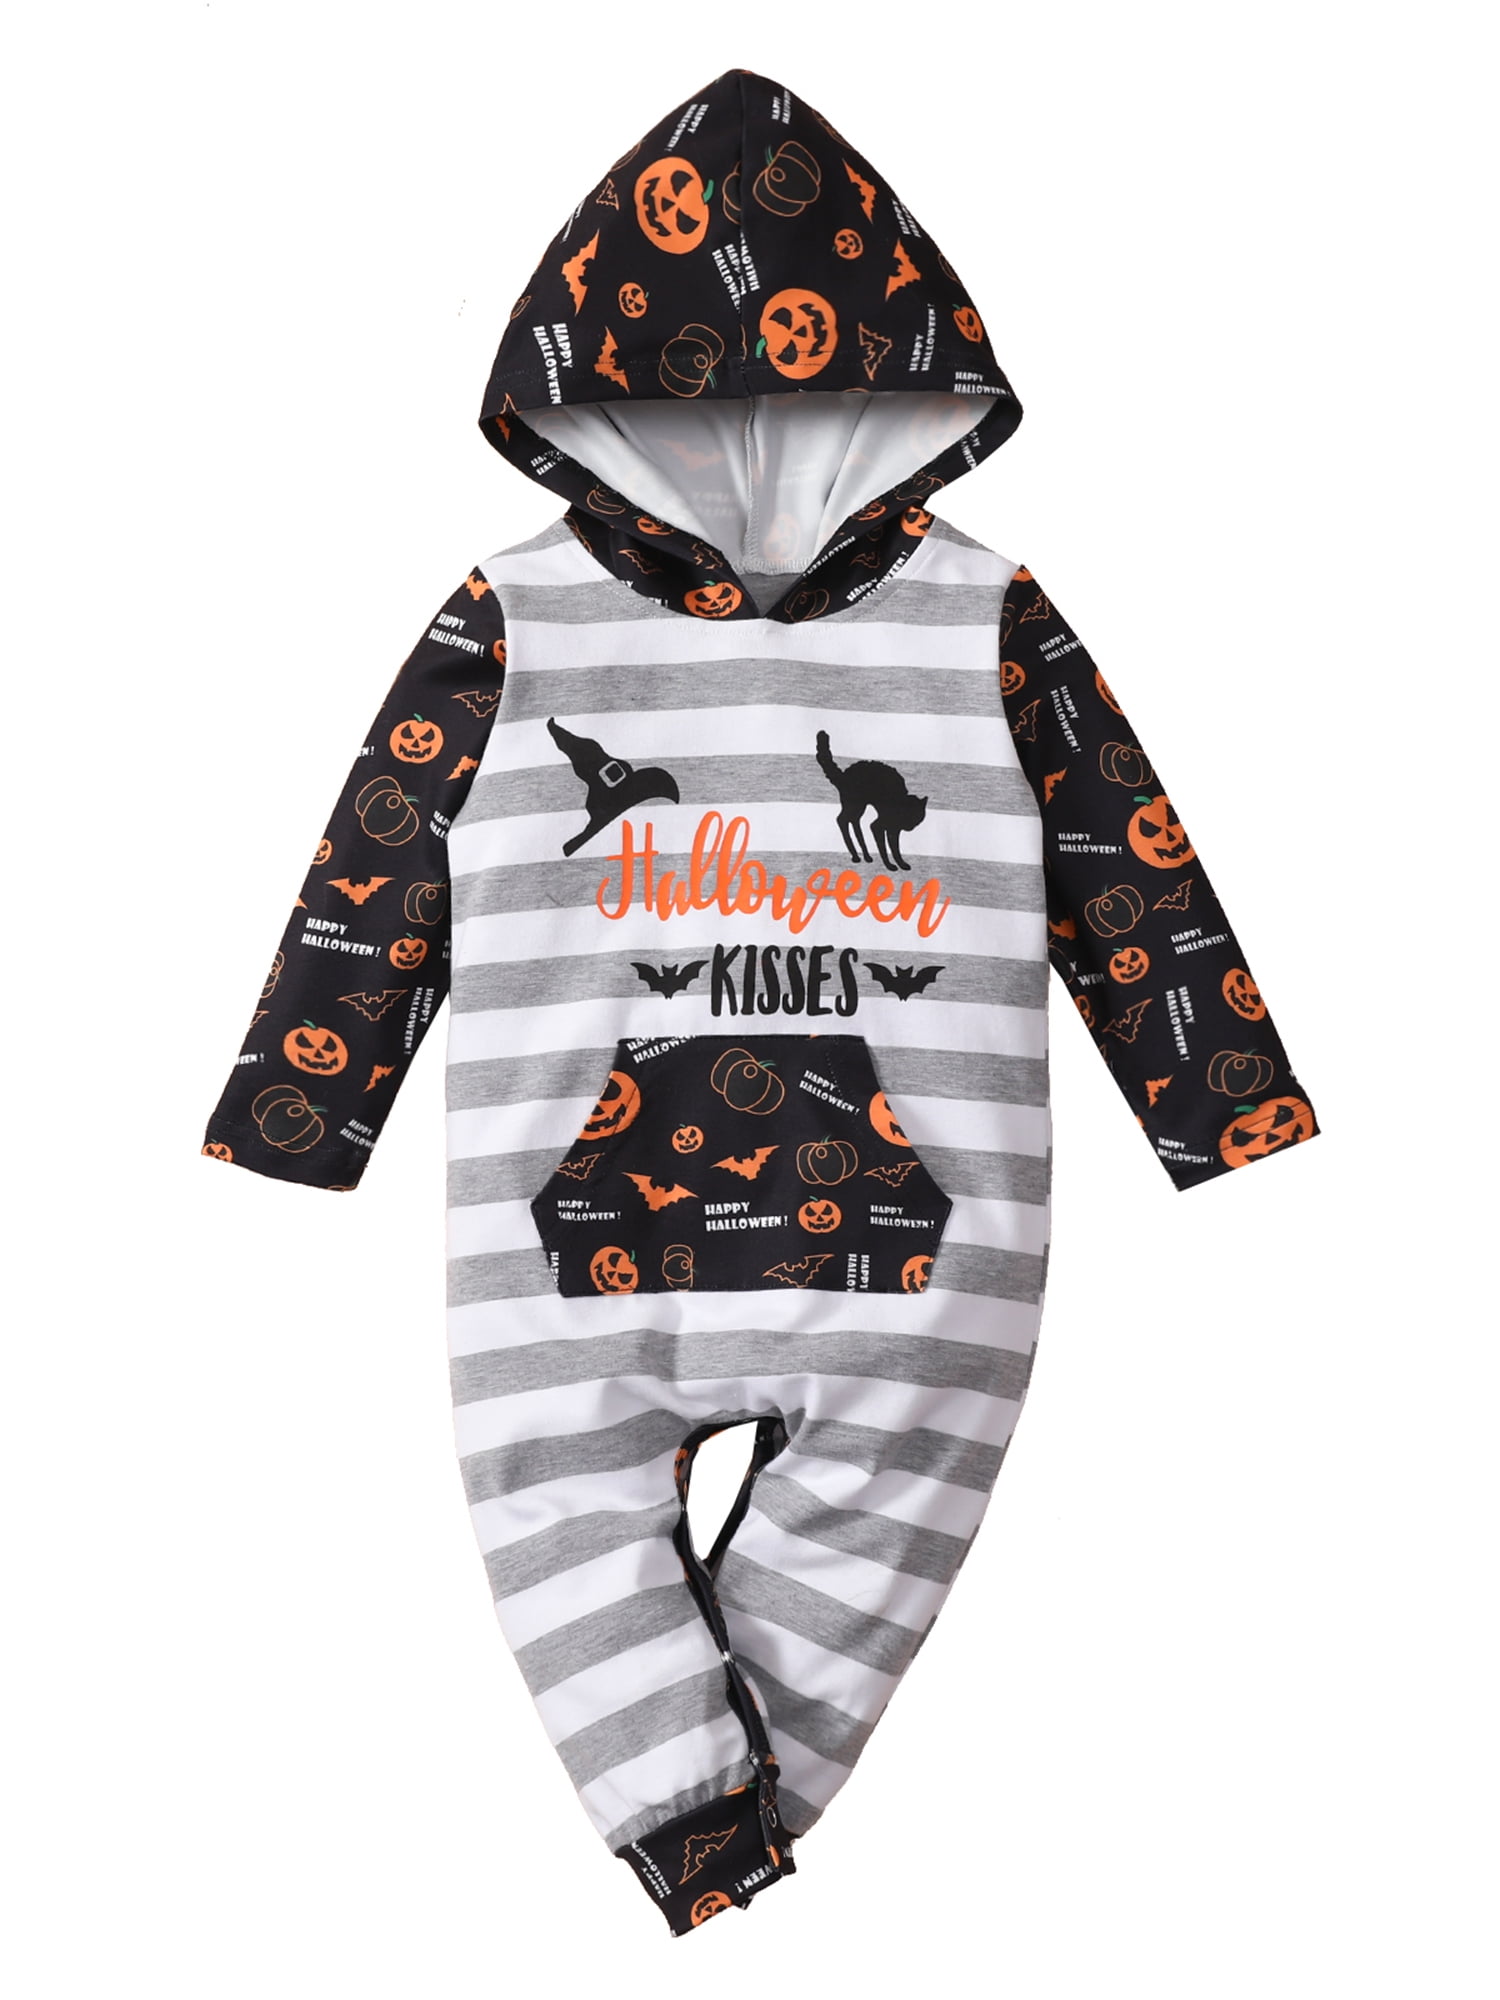 Baby Romper Winter,Longra Infant Baby Girl Boy Kids Halloween Printed Romper Jumpsuit Clothes Outfits for 0-24 Months 